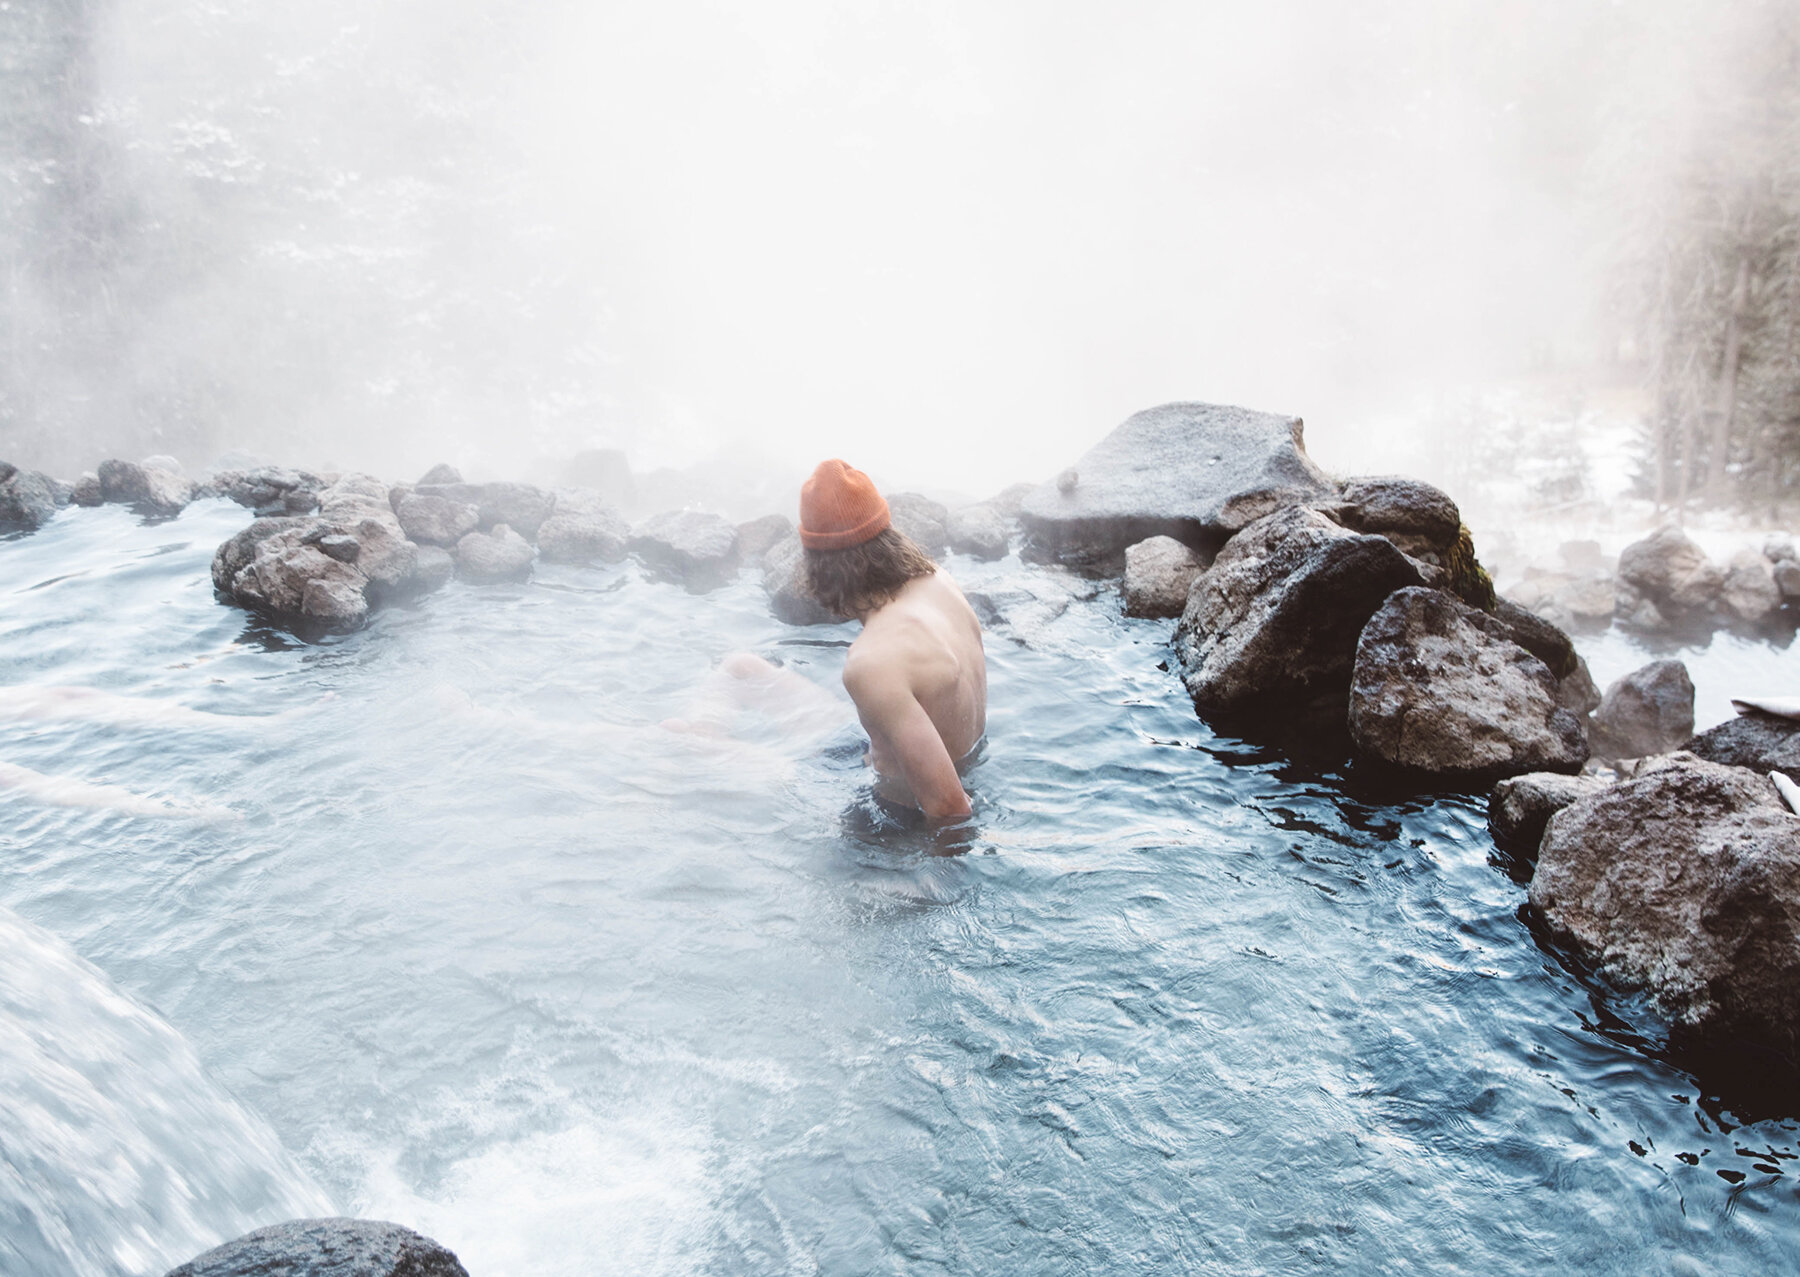 What Are The Benefits Of Hot Springs In California For Arthritis?